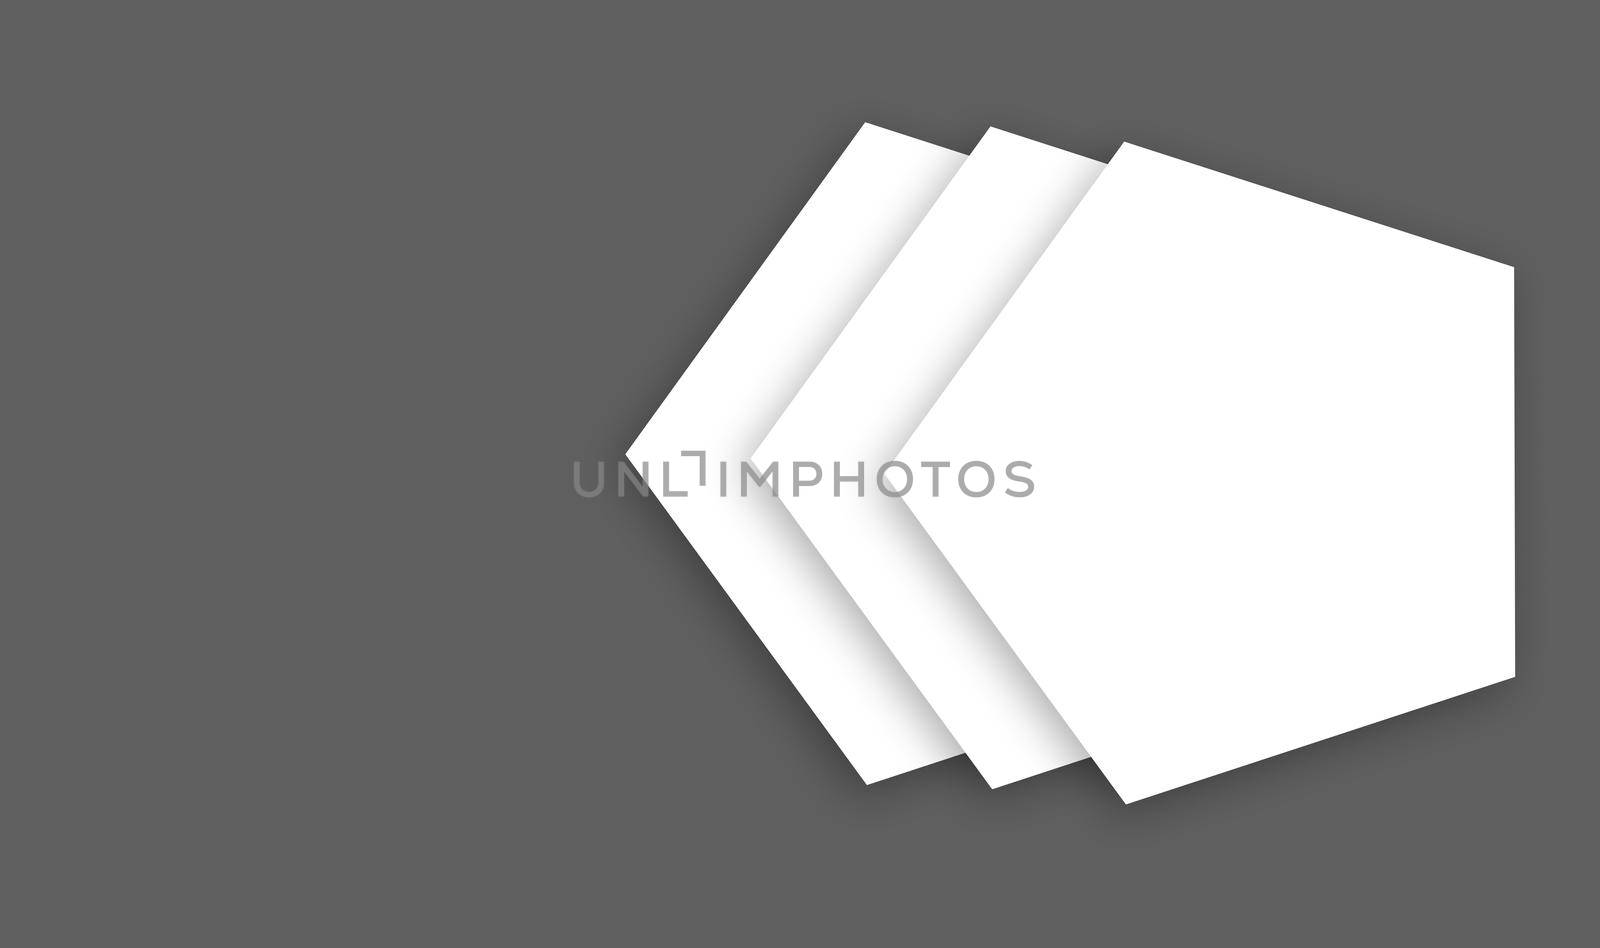 three pentagons overlapping on each other in a gray background with soft shadow, layered image ready to print for cards, invitation, design print